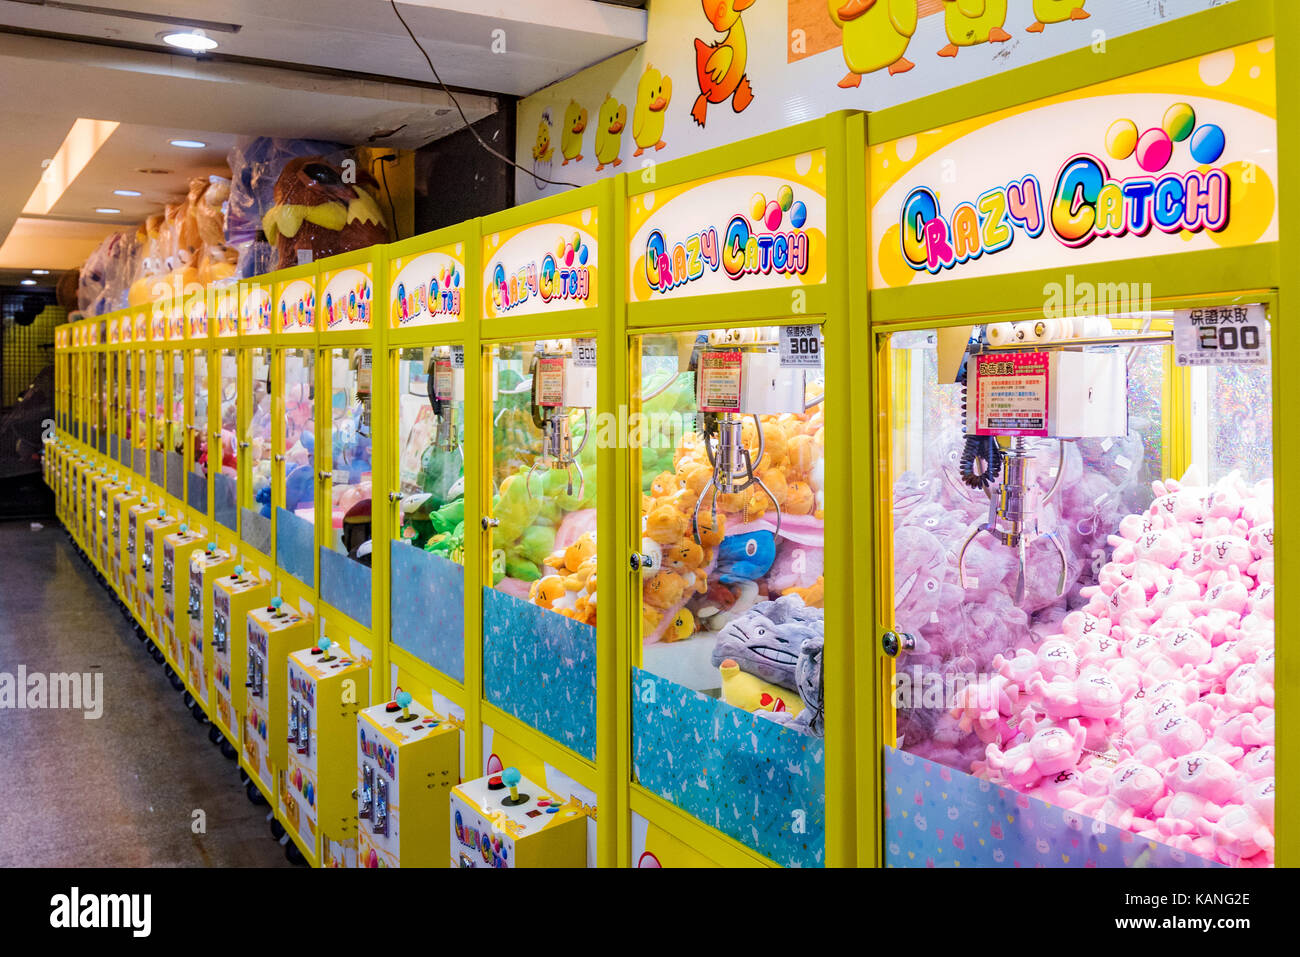 TAIPEI, TAIWAN - JULY 11: This is an arcade with crane games where people can win toys which are common across night markets in Taiwan on July 11, 201 Stock Photo